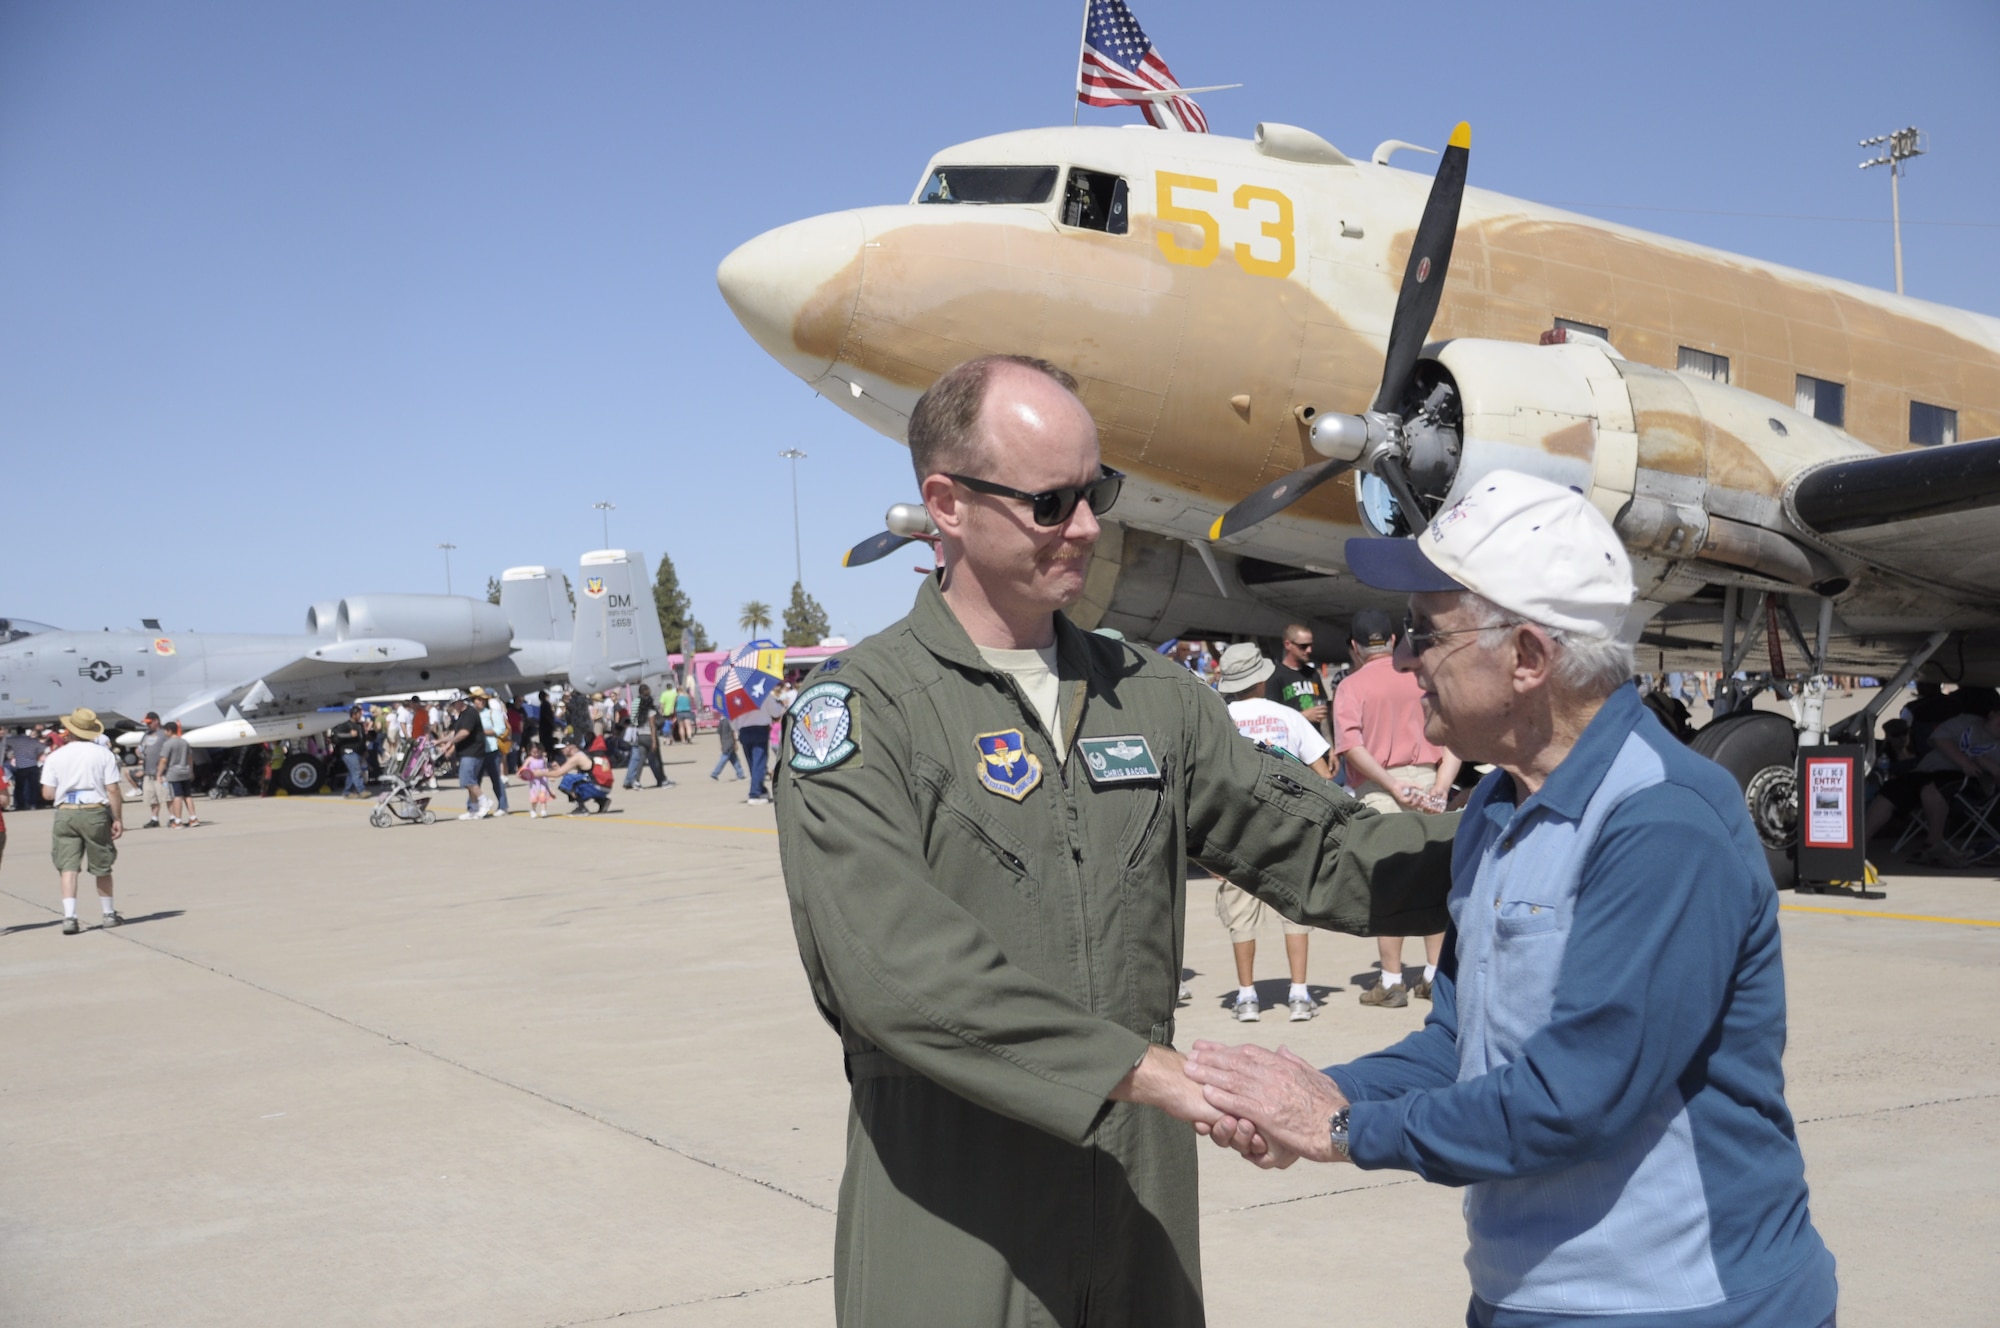 Lt. Col. Chris Bacon, 308th Fighter Squadron commander, coins 1st Lt. Ken Sadick, a World War II veteran, March 15 at Luke Air Force Base's Open House and Air Show. Sadick, 90 years old, graduated from Luke Field in March 1944, receiving his wings exactly 70 years ago this month. (U.S. Air Force photo by Staff Sgt. Timothy Boyer) 
